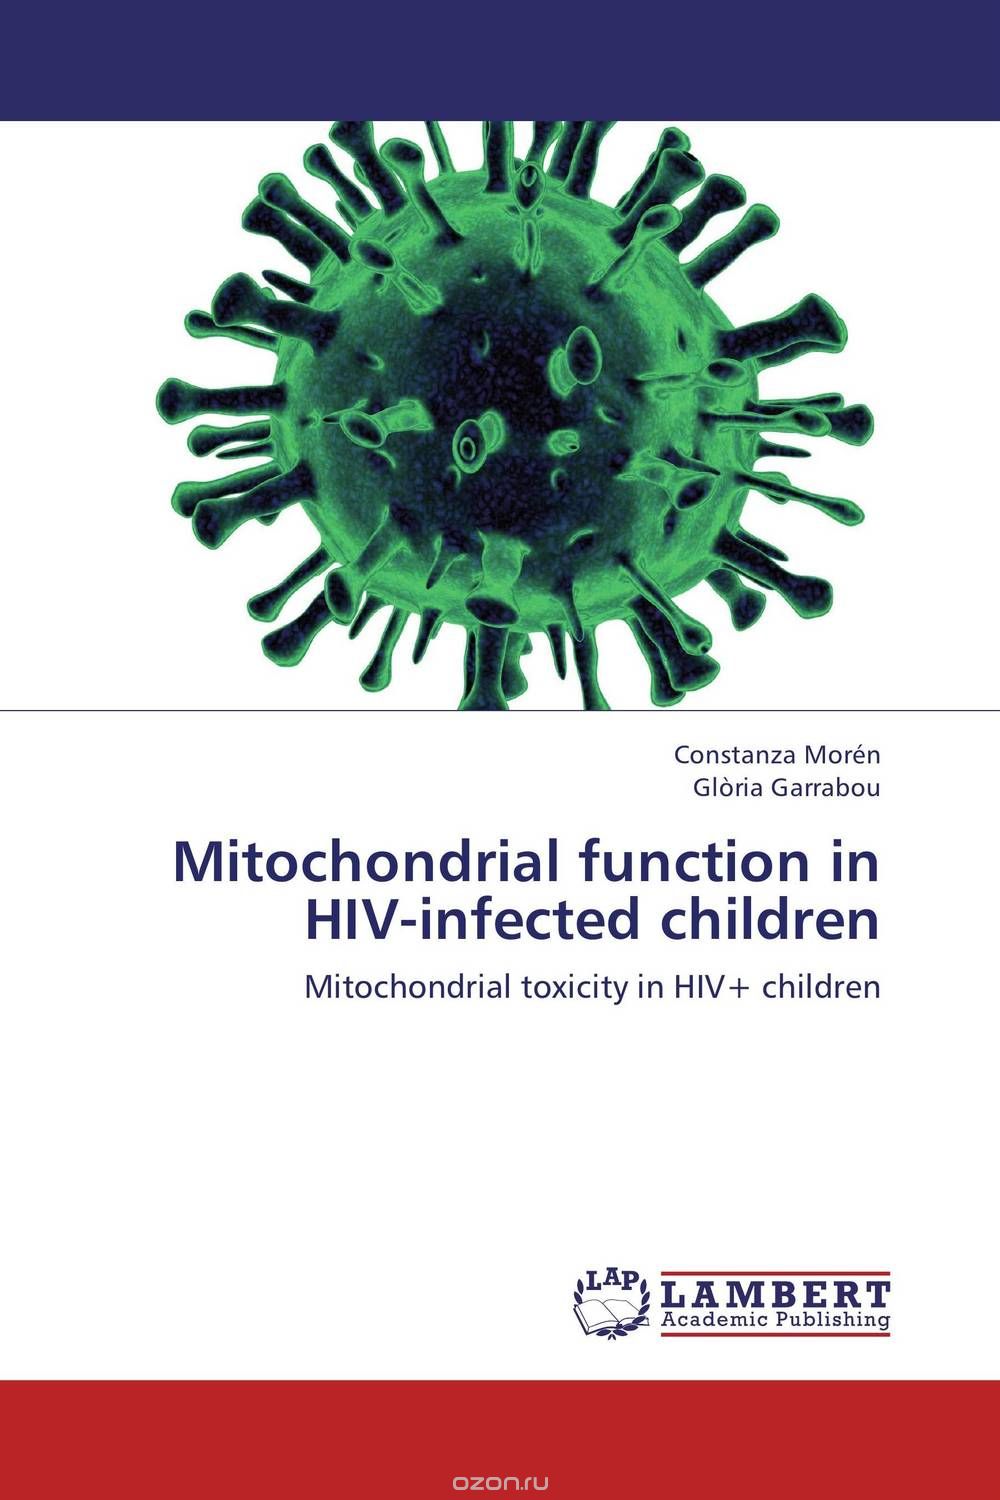 Mitochondrial function in HIV-infected children